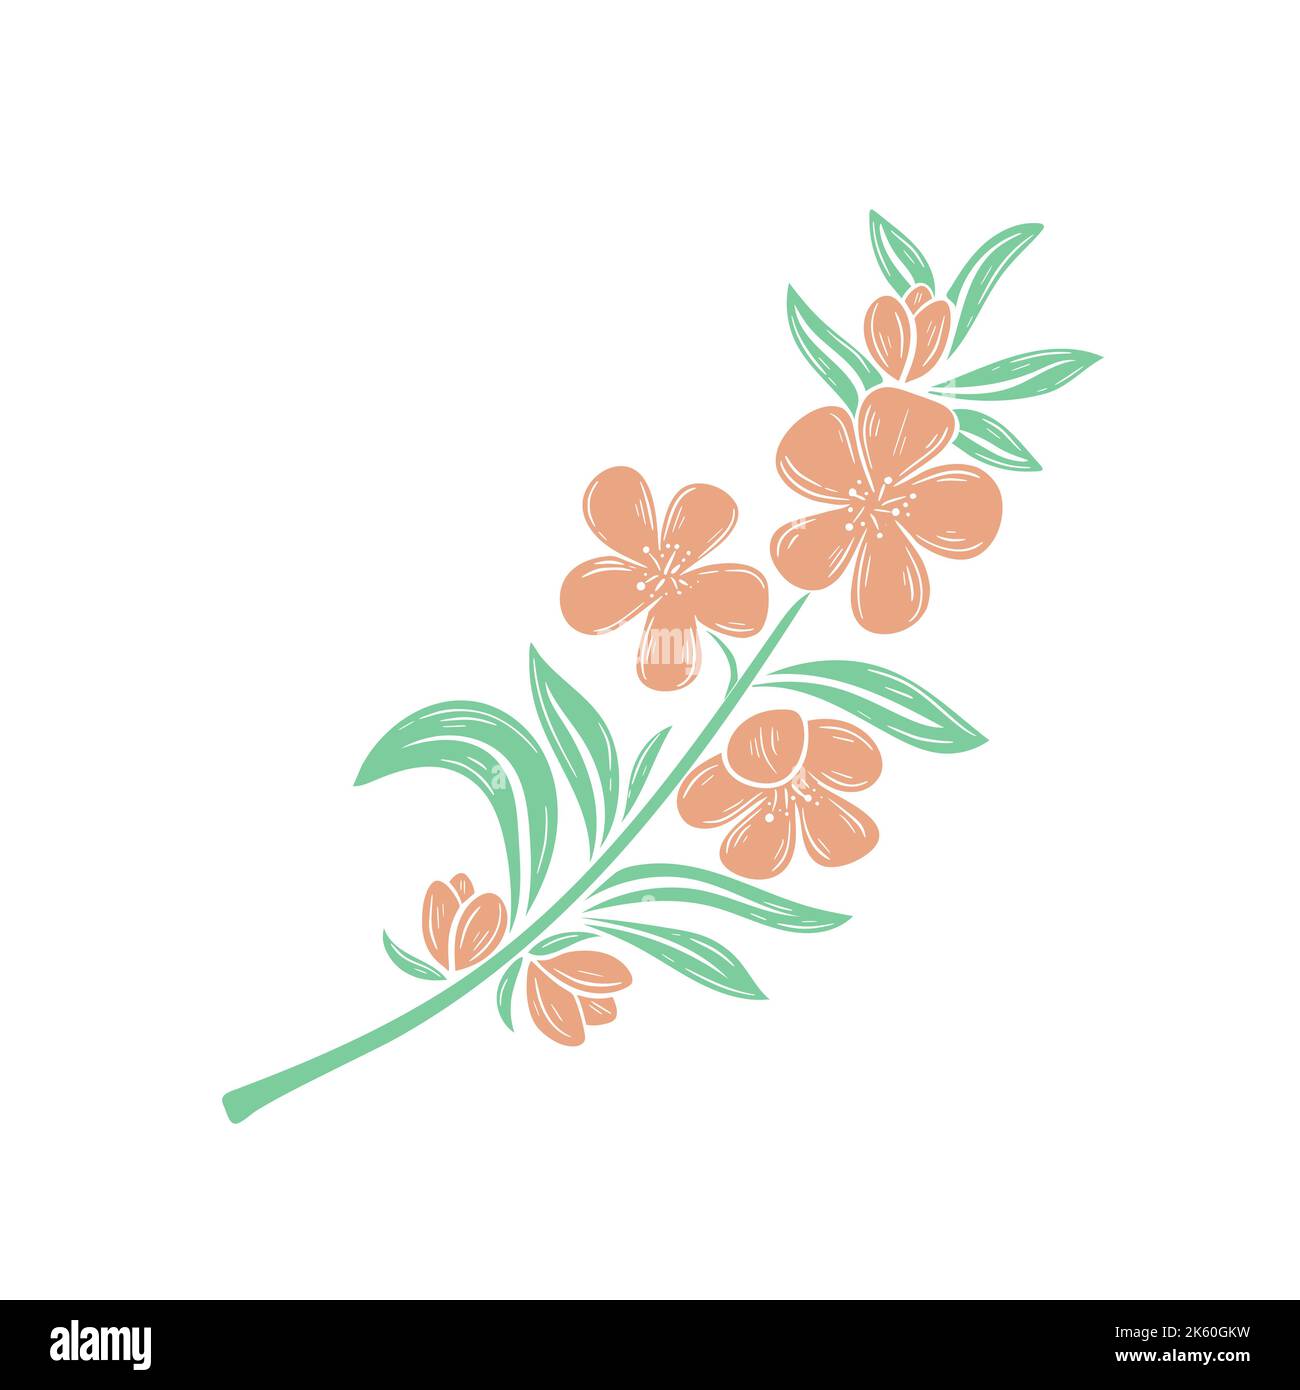 Flowering twig of apple or cherry tree. Delicate peach flowers and foliage branch. Natural decoration of apricot or almond blossom vector isolated Stock Vector